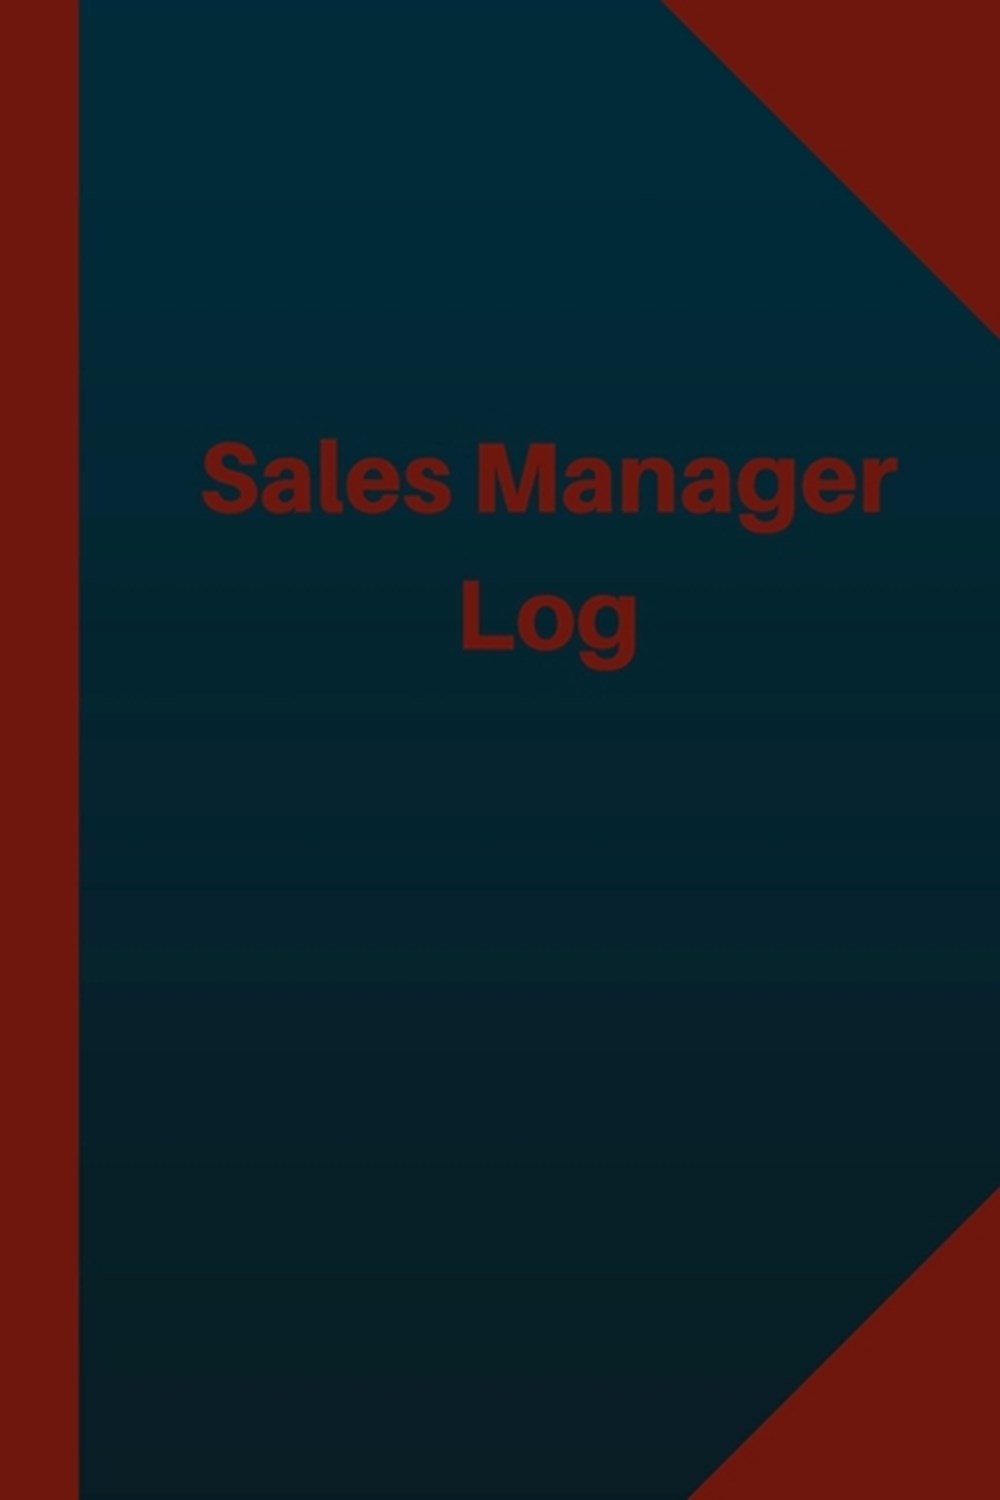 Sales Manager Log (Logbook, Journal - 124 pages 6x9 inches) Sales Manager Logbook (Blue Cover, Mediu